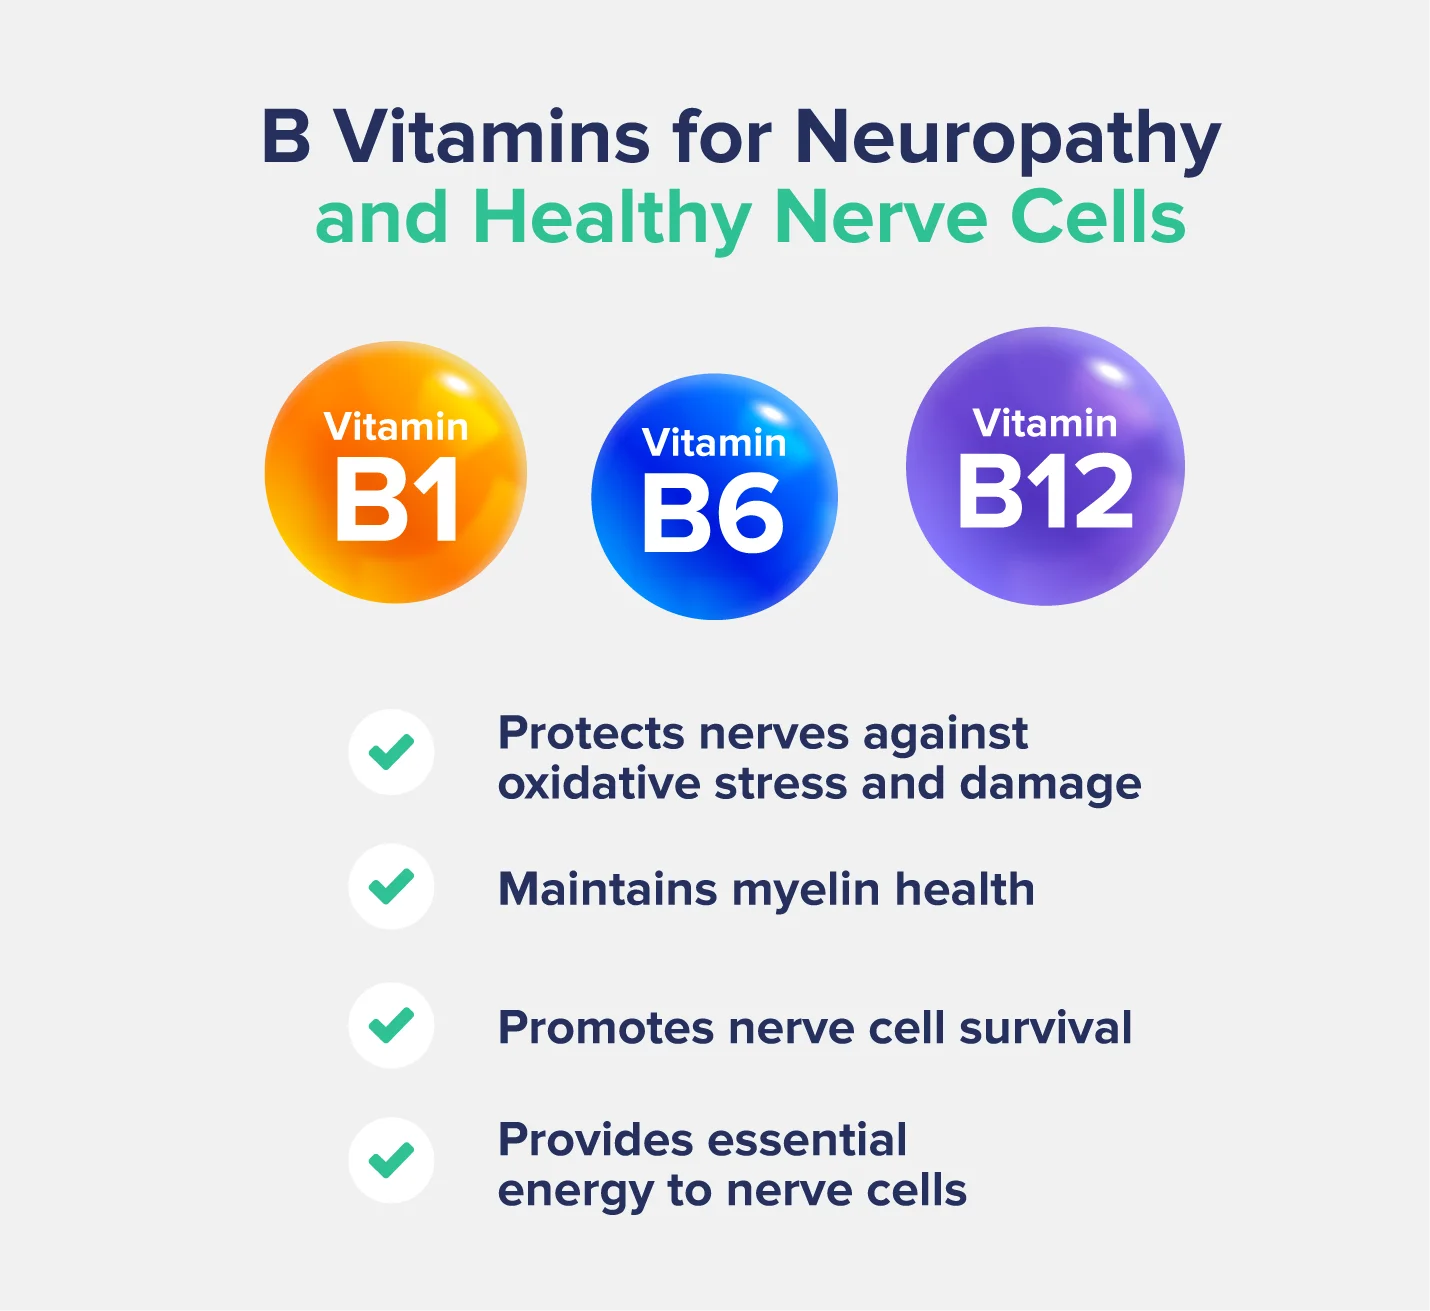 A graphic entitled "B Vitamins for Neuropathy and Healthy Nerve Cells" displaying three colored orbs representing vitamins B1, B6, and B12 with a list underneath describing benefits like "maintains myelin sheath" and "promotes nerve cell survival" 